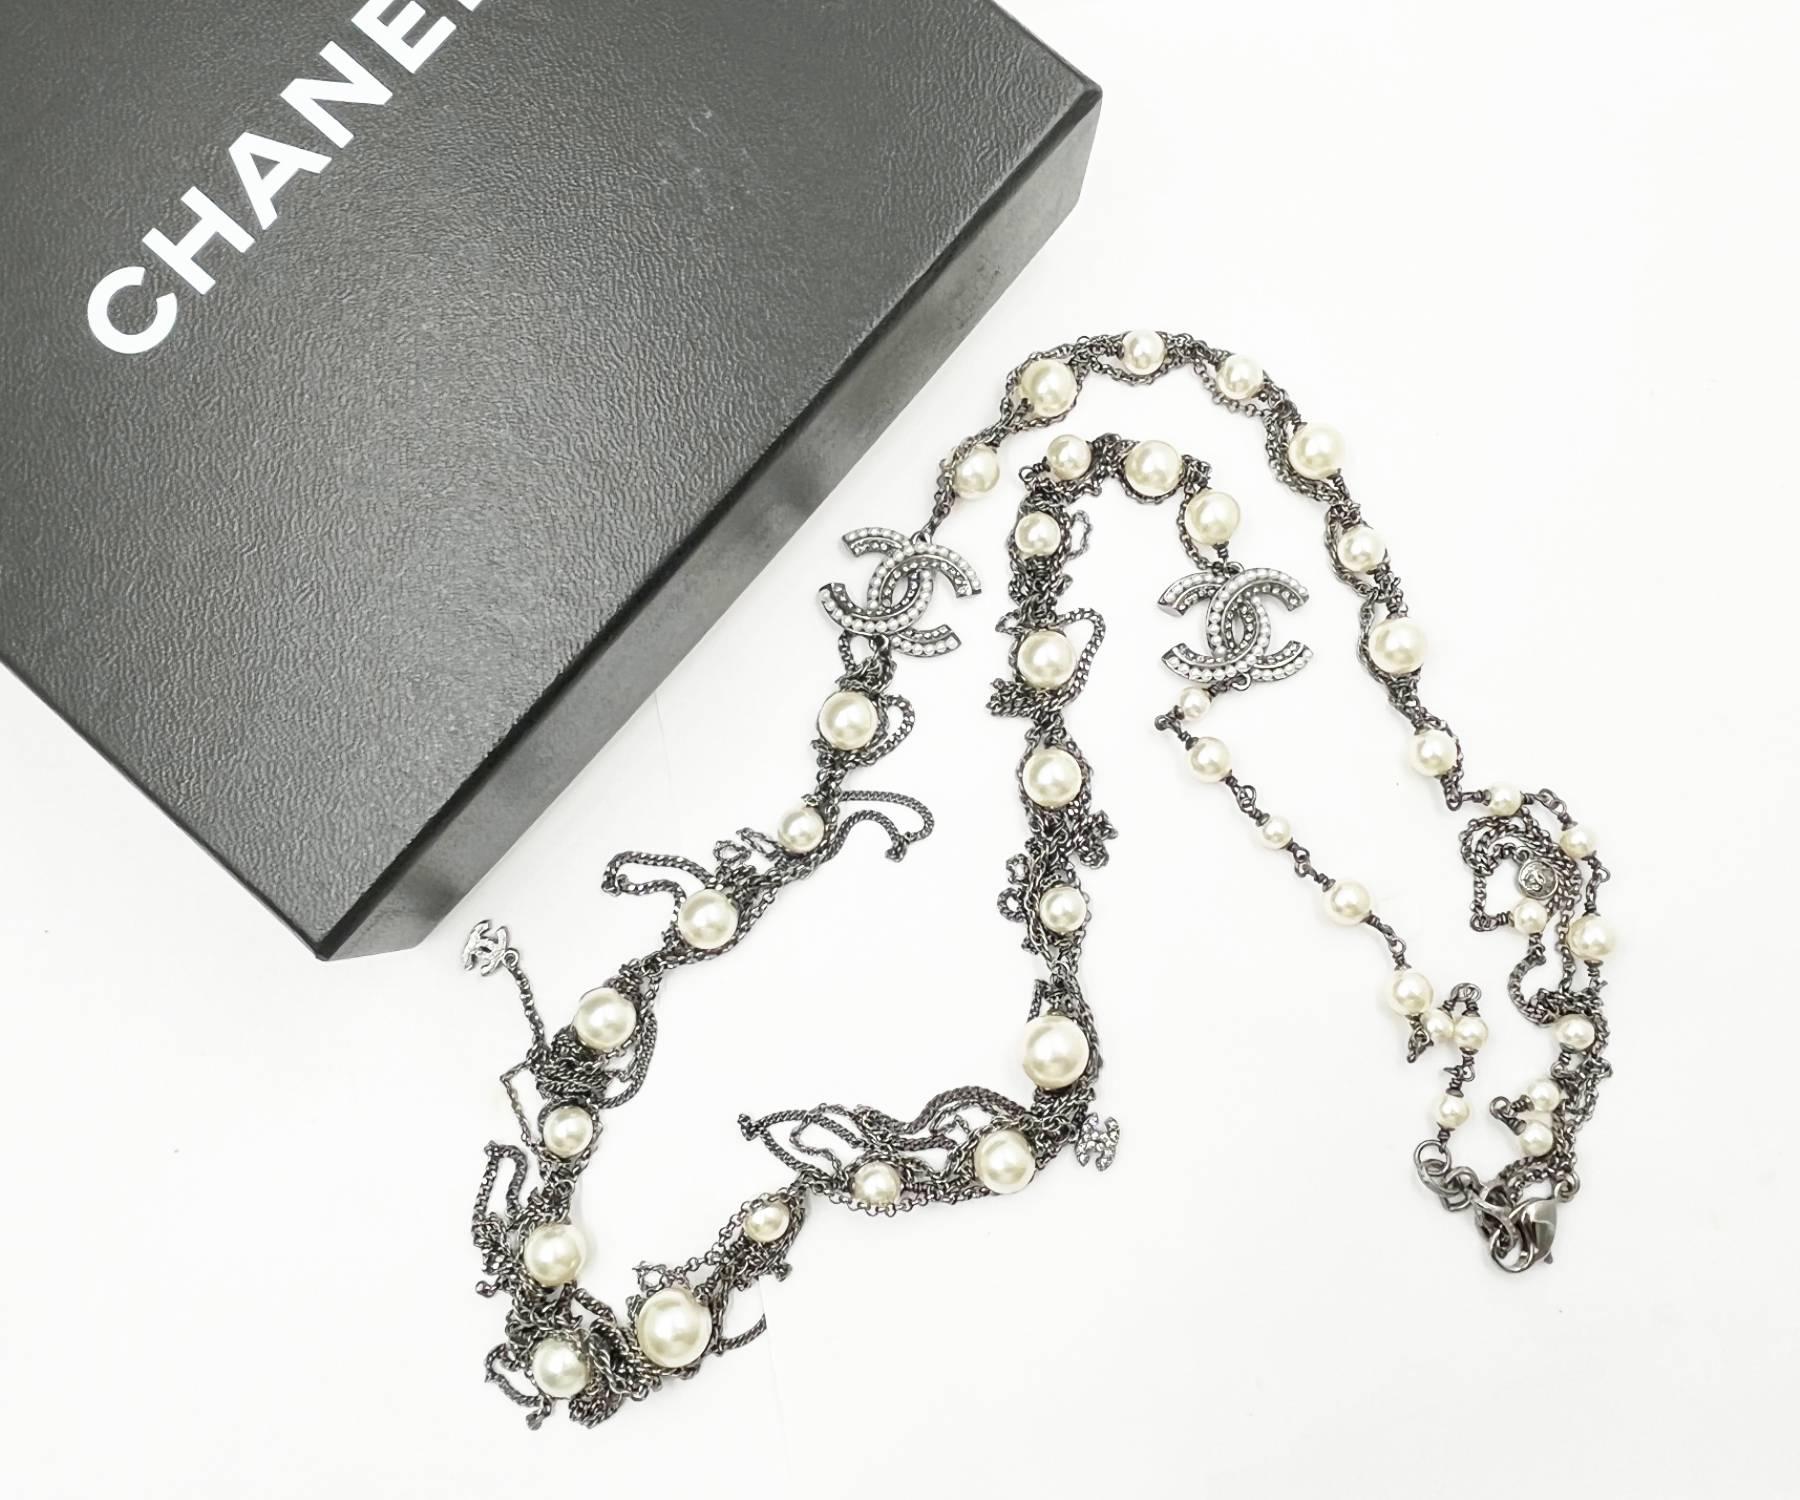 Chanel Gunmetal Pearl Dangling Chain Long Necklace

*Marked 10
*Made in France
*Comes with the original box

-Approximately 37″ long
-Very chic design, wear as a single chain or wrap around
-Pristine condition

6170-48255

